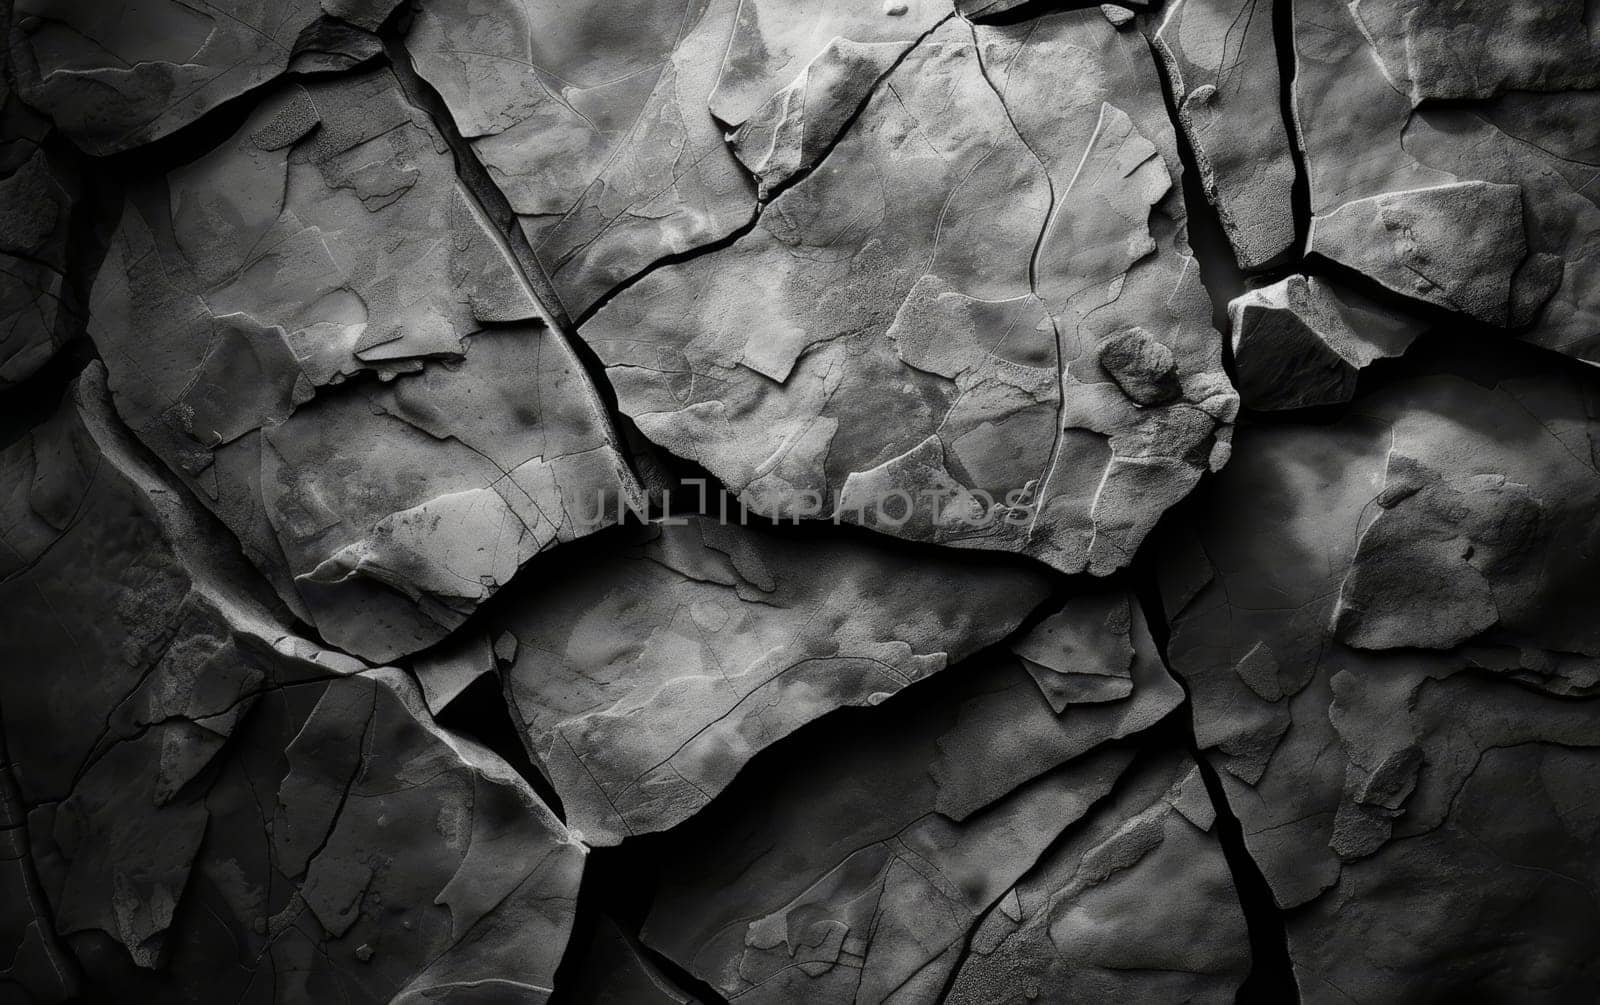 Monochrome image of a stone wall constructed with rectangular slates showing cracks and textures.. by sfinks